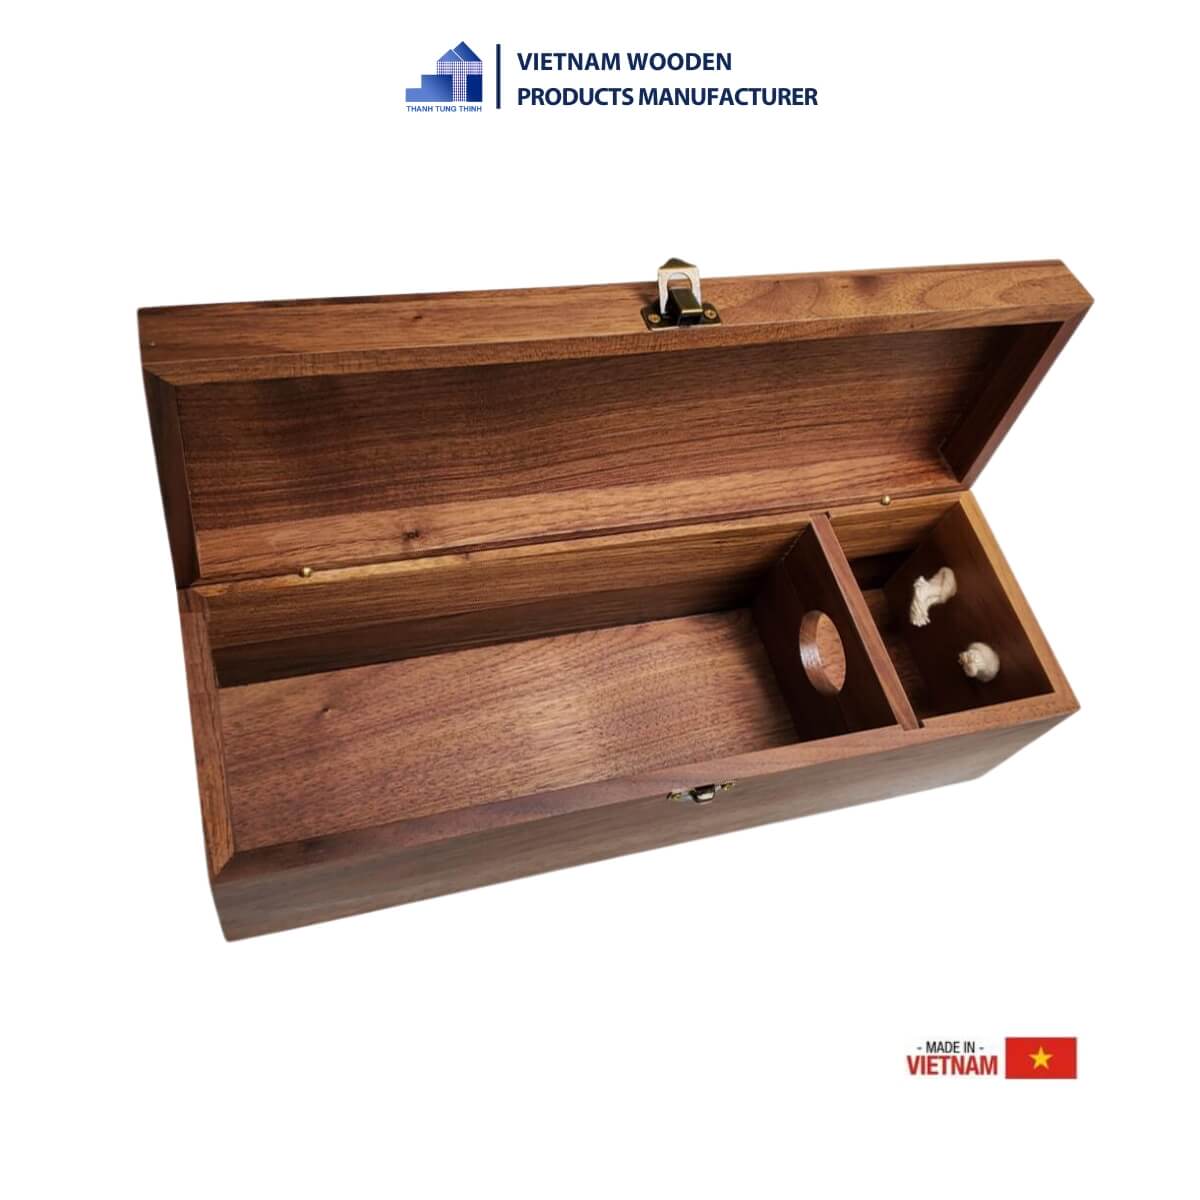 wooden-wine-box-producer6-2